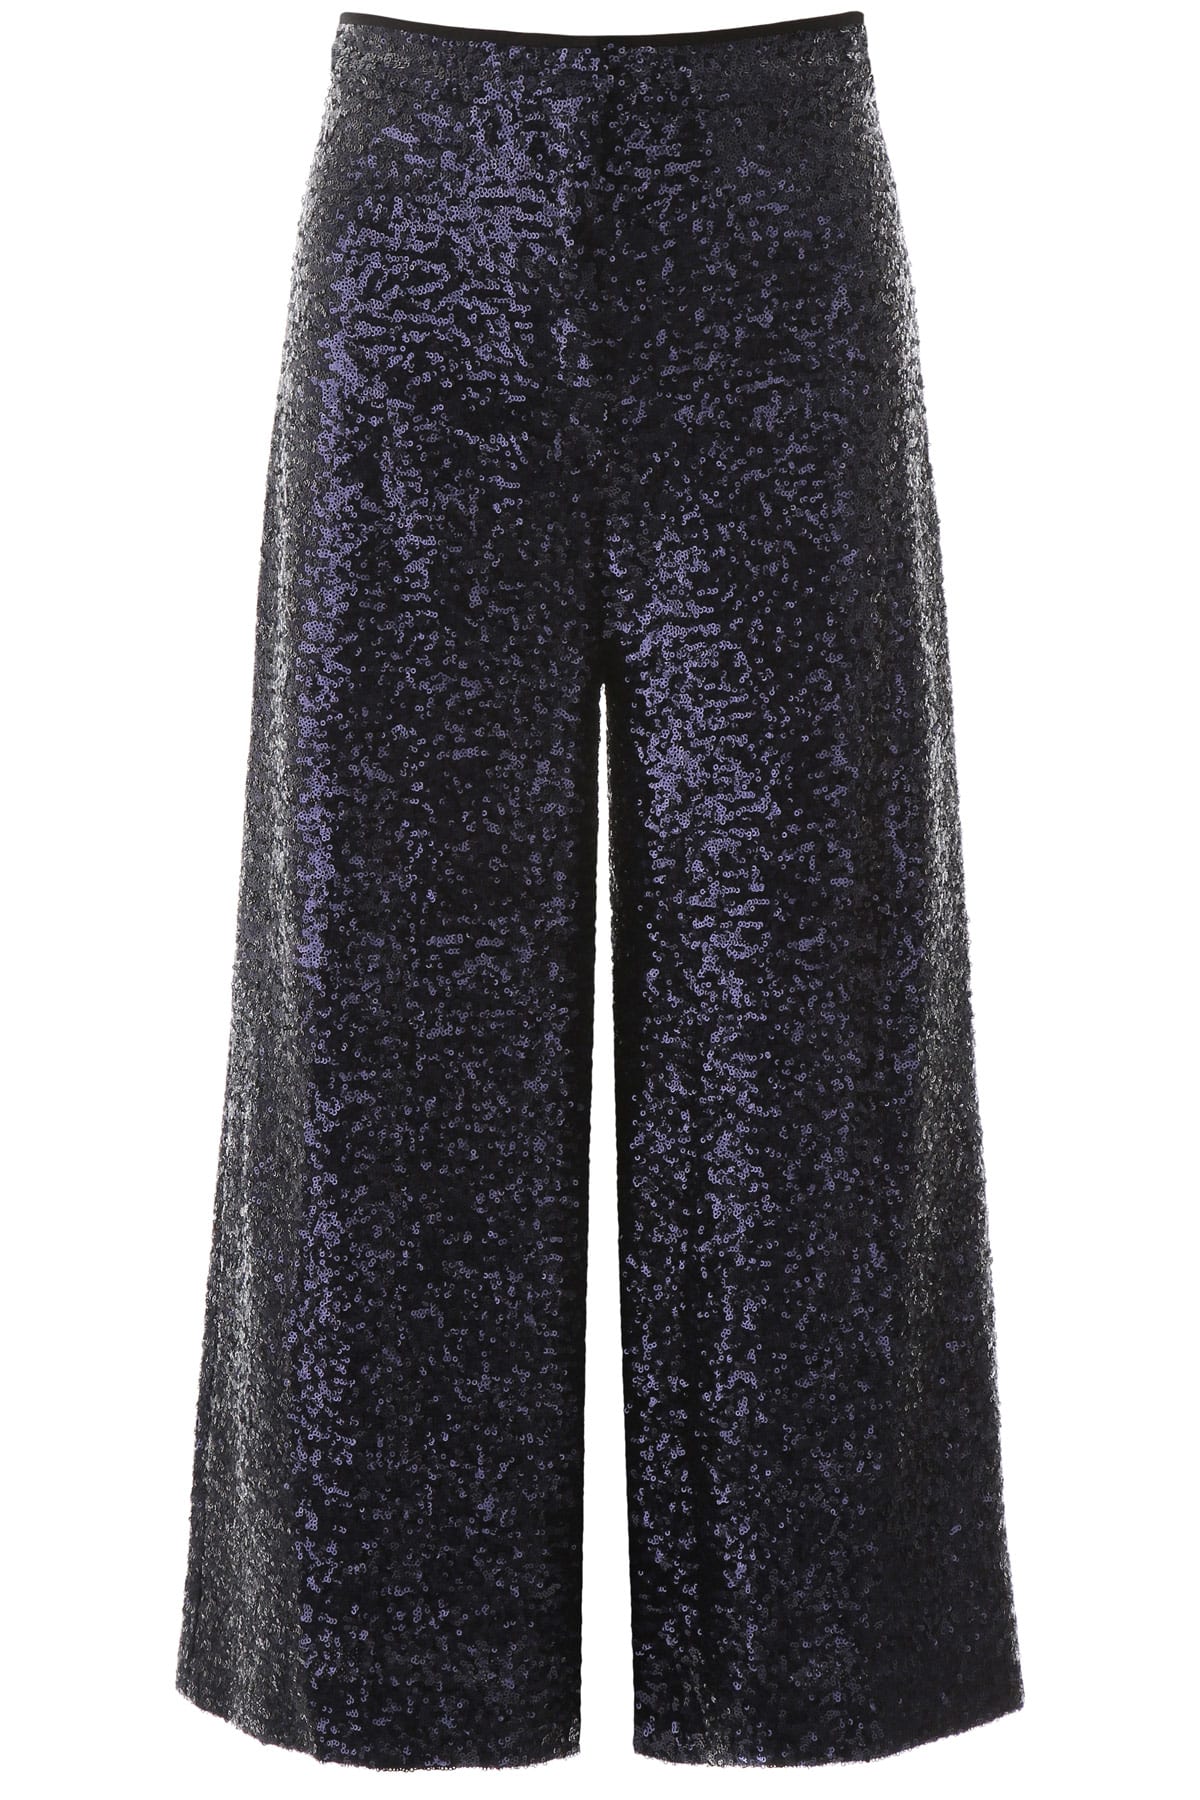 IN THE MOOD FOR LOVE SEQUINED CULOTTE TROUSERS,JENNA PANT BLUE